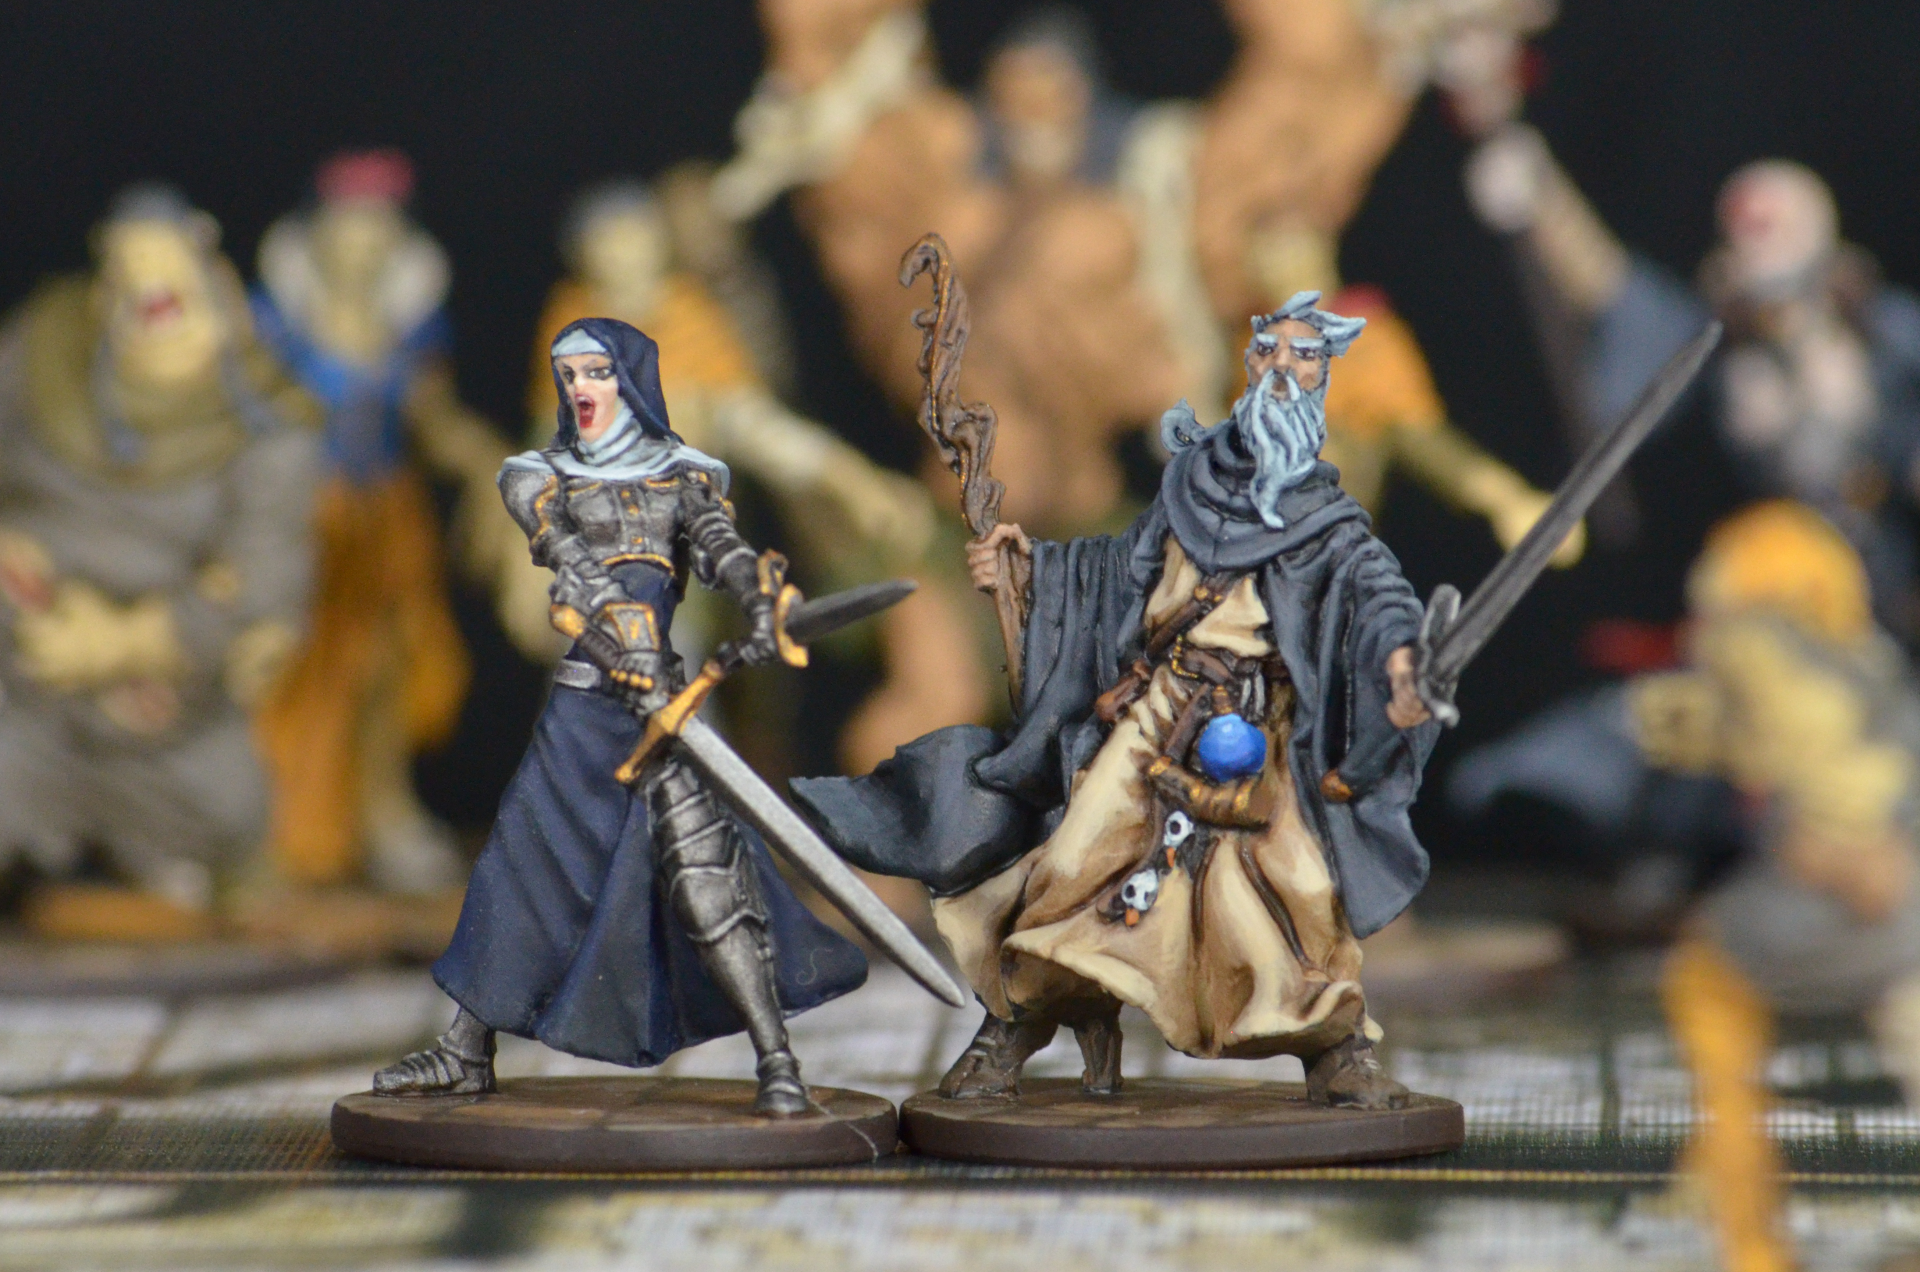 Ann and Baldric from Zombicide: Black Plague